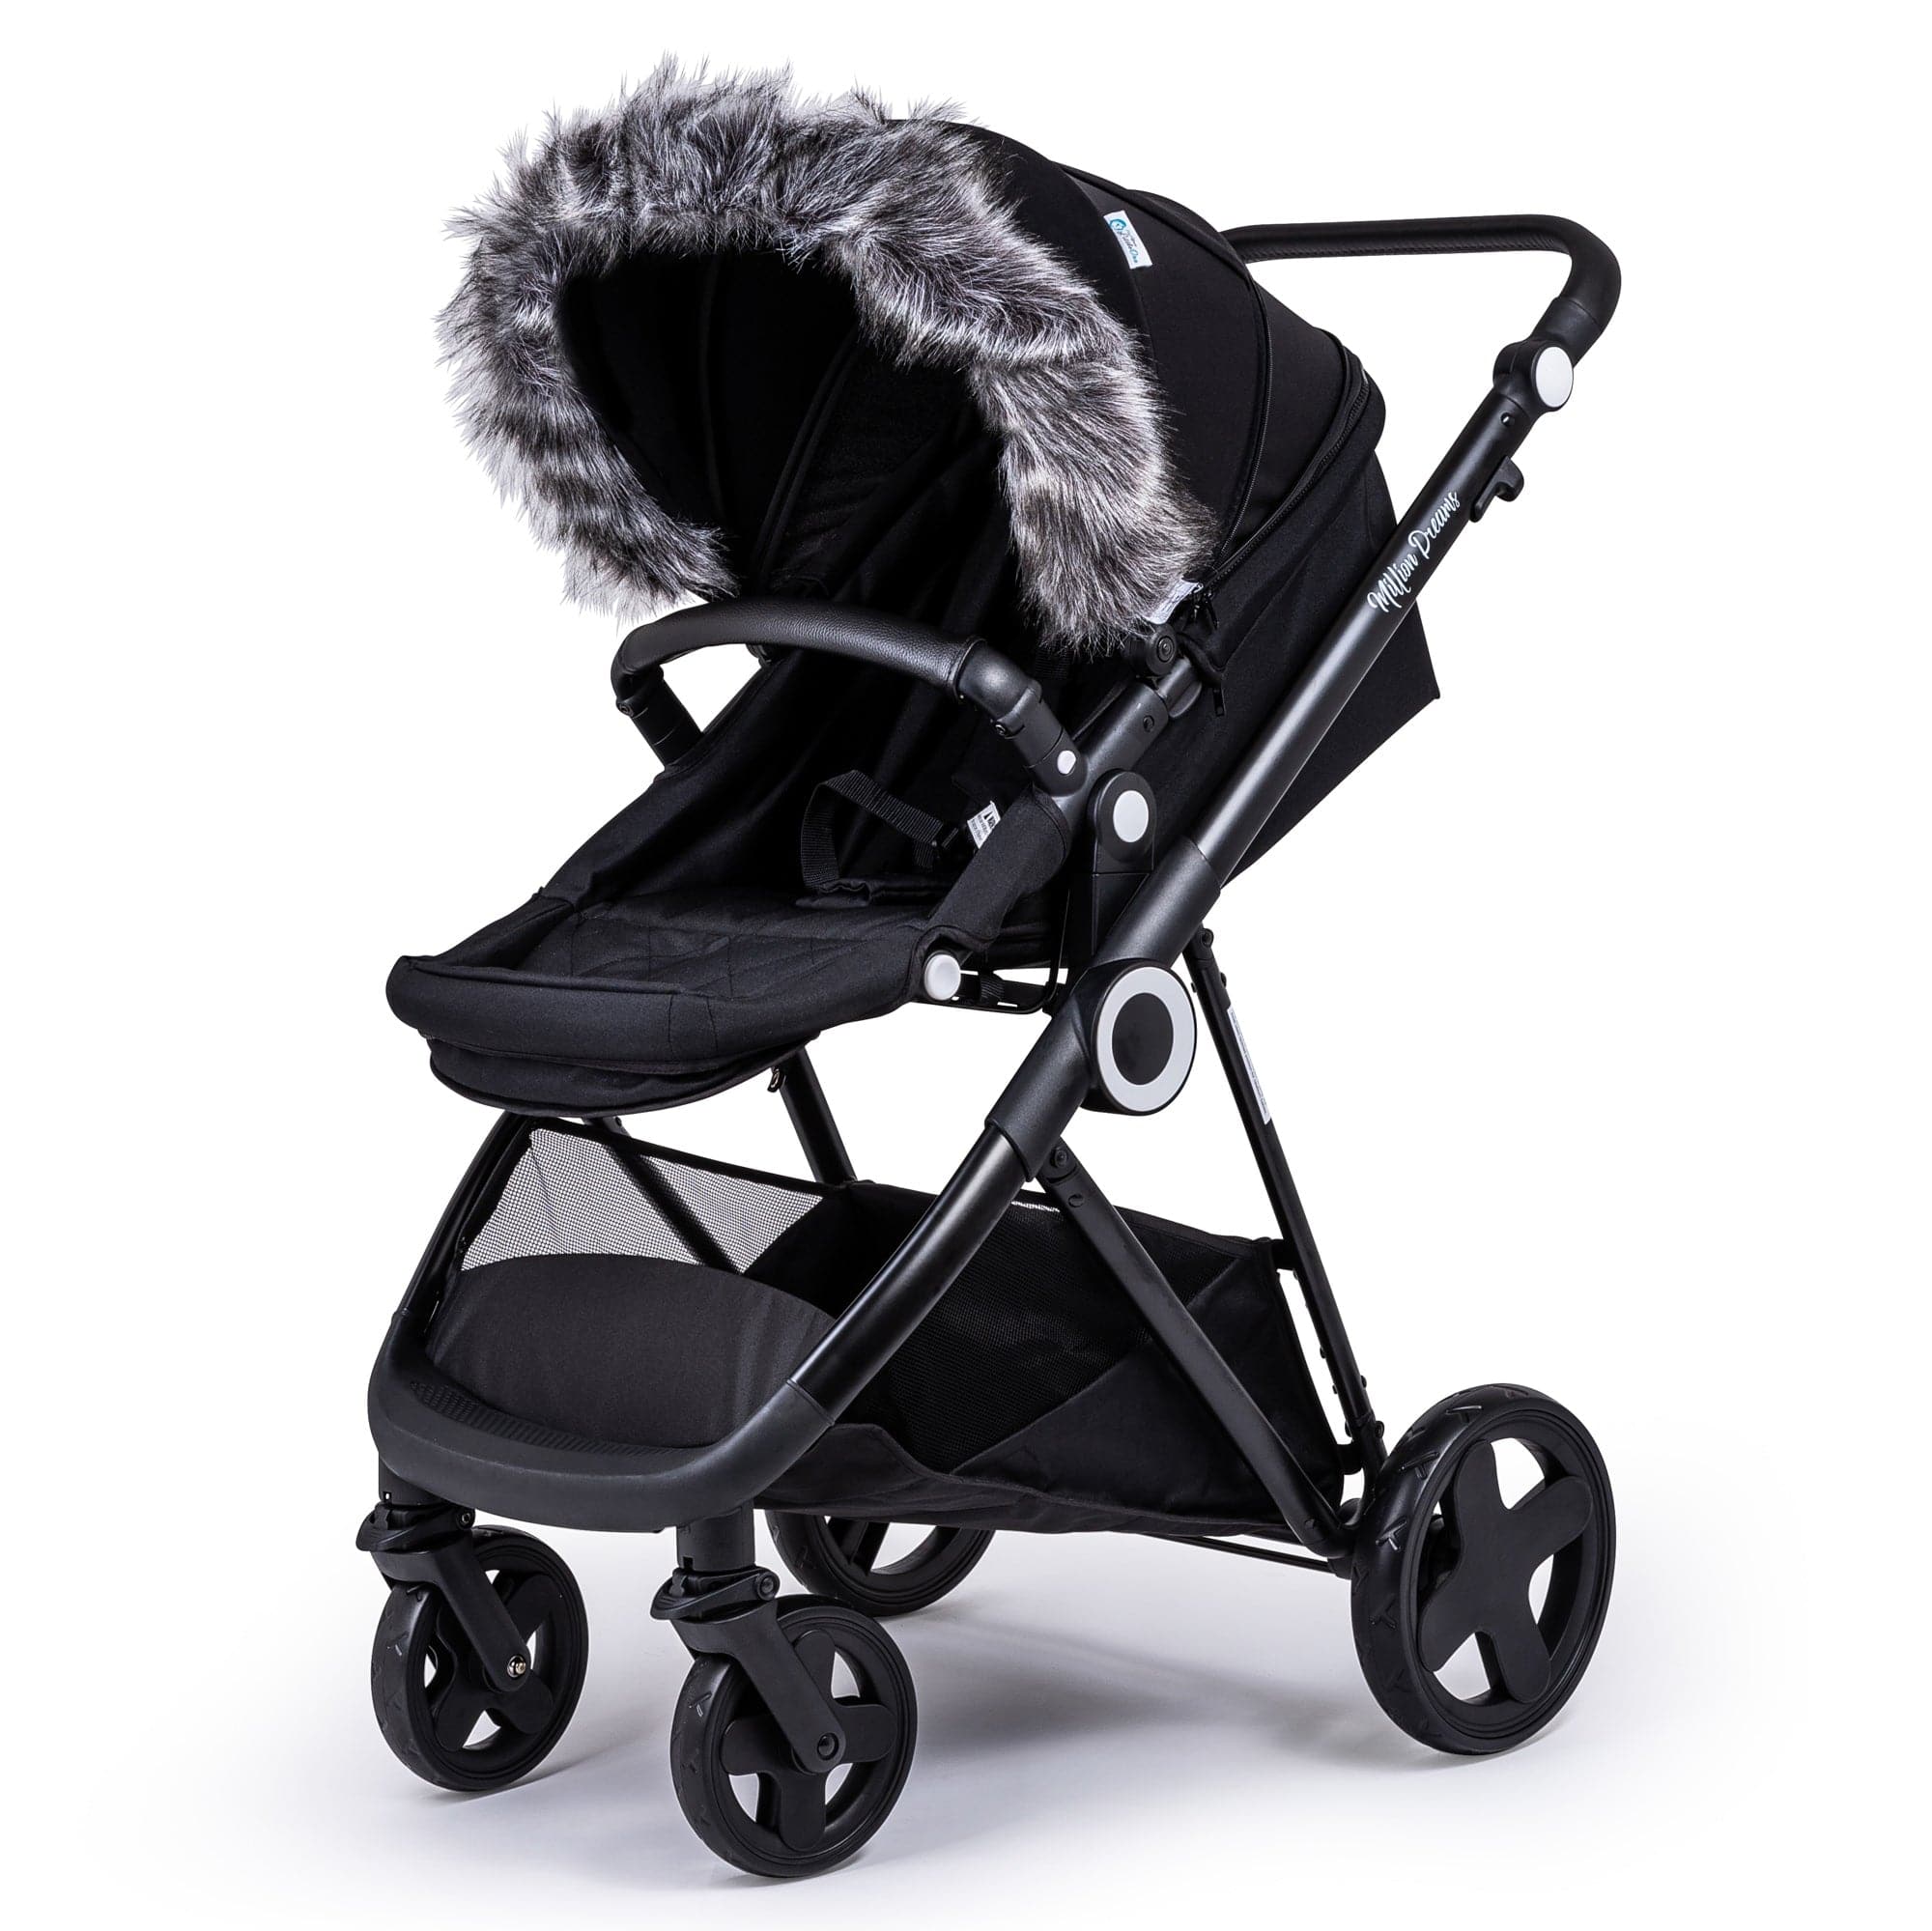 Pram Fur Hood Trim Attachment For Pushchair Compatible with Roma - Dark Grey / Fits All Models | For Your Little One